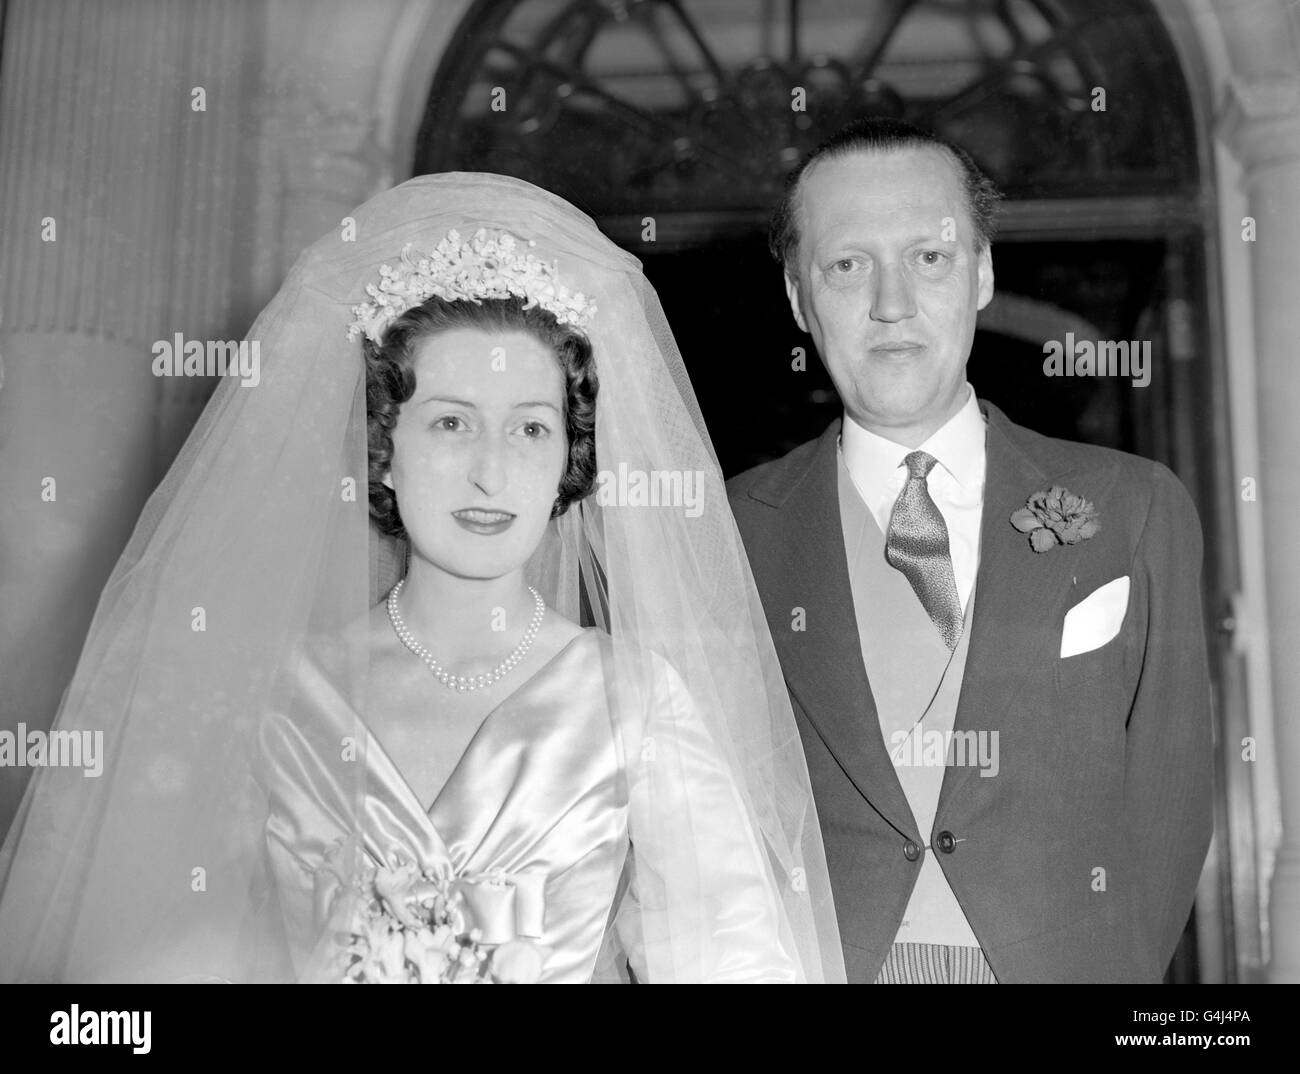 Diana Bowes-Lyon, niece of the Queen Mother, pictured with Prince Georg of Denmark, who was to give away the bride, as they left London's Connaught Hotel in Carlos Place for the wedding ceremony which was to take place at Westminster Abbey. Stock Photo